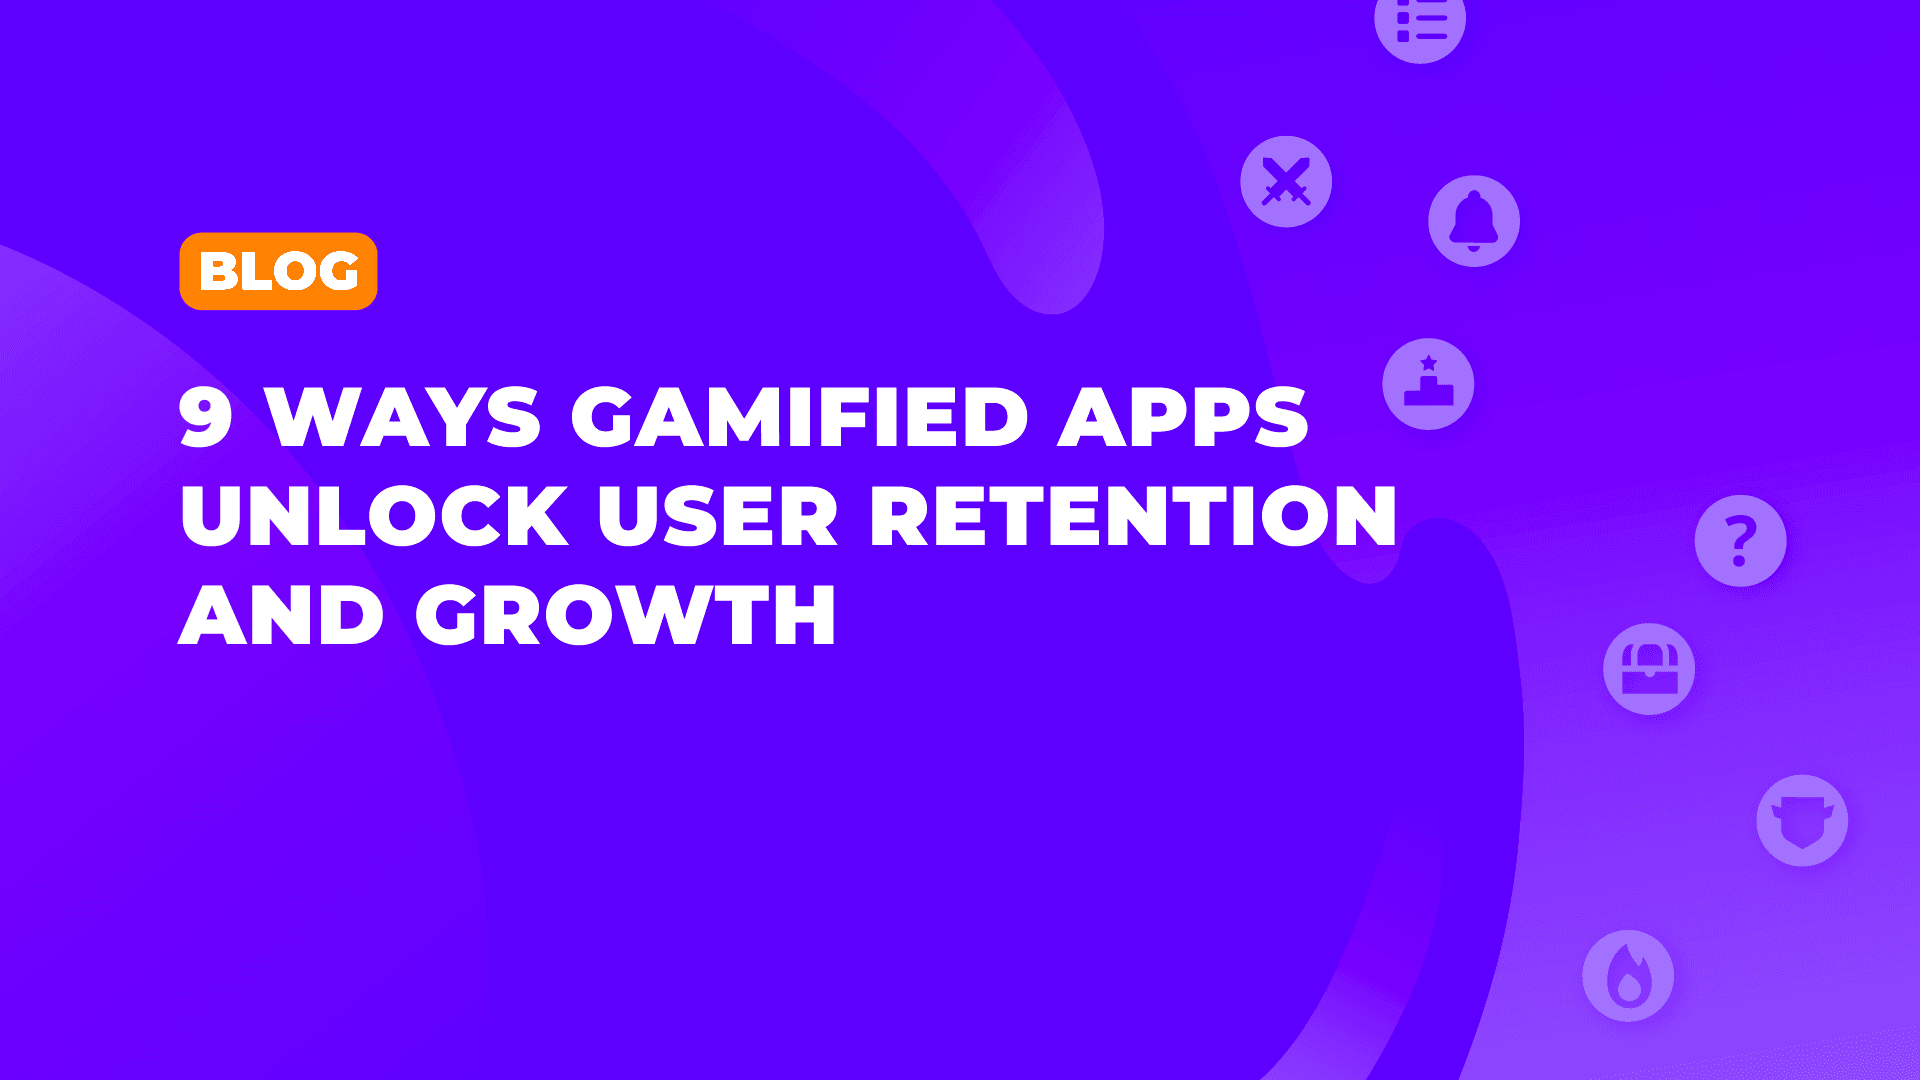 9 gamification apps examples that show how gamified apps unlock user retention and growth cover